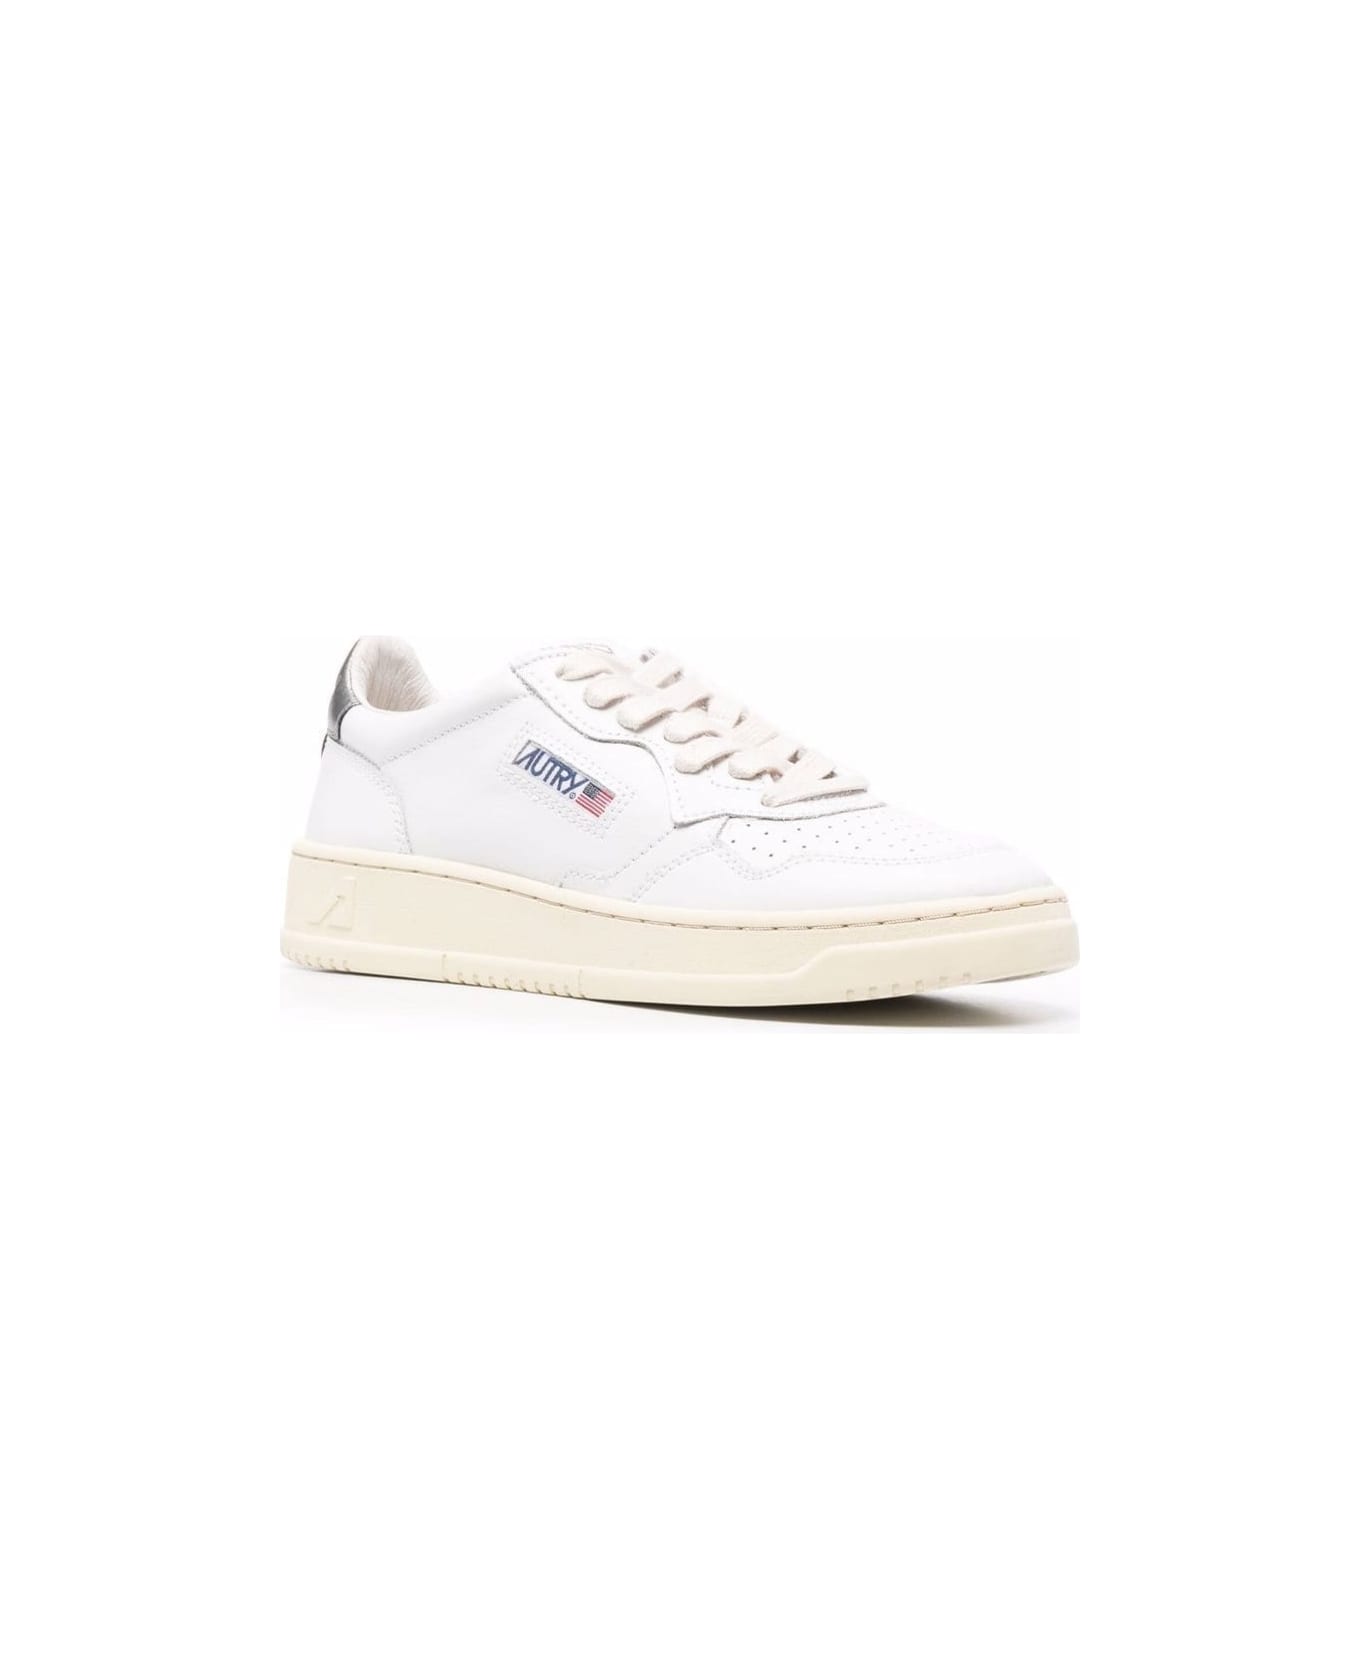 Autry White And Silver Leather Sneakers Autry Woman - Bianco/Argento